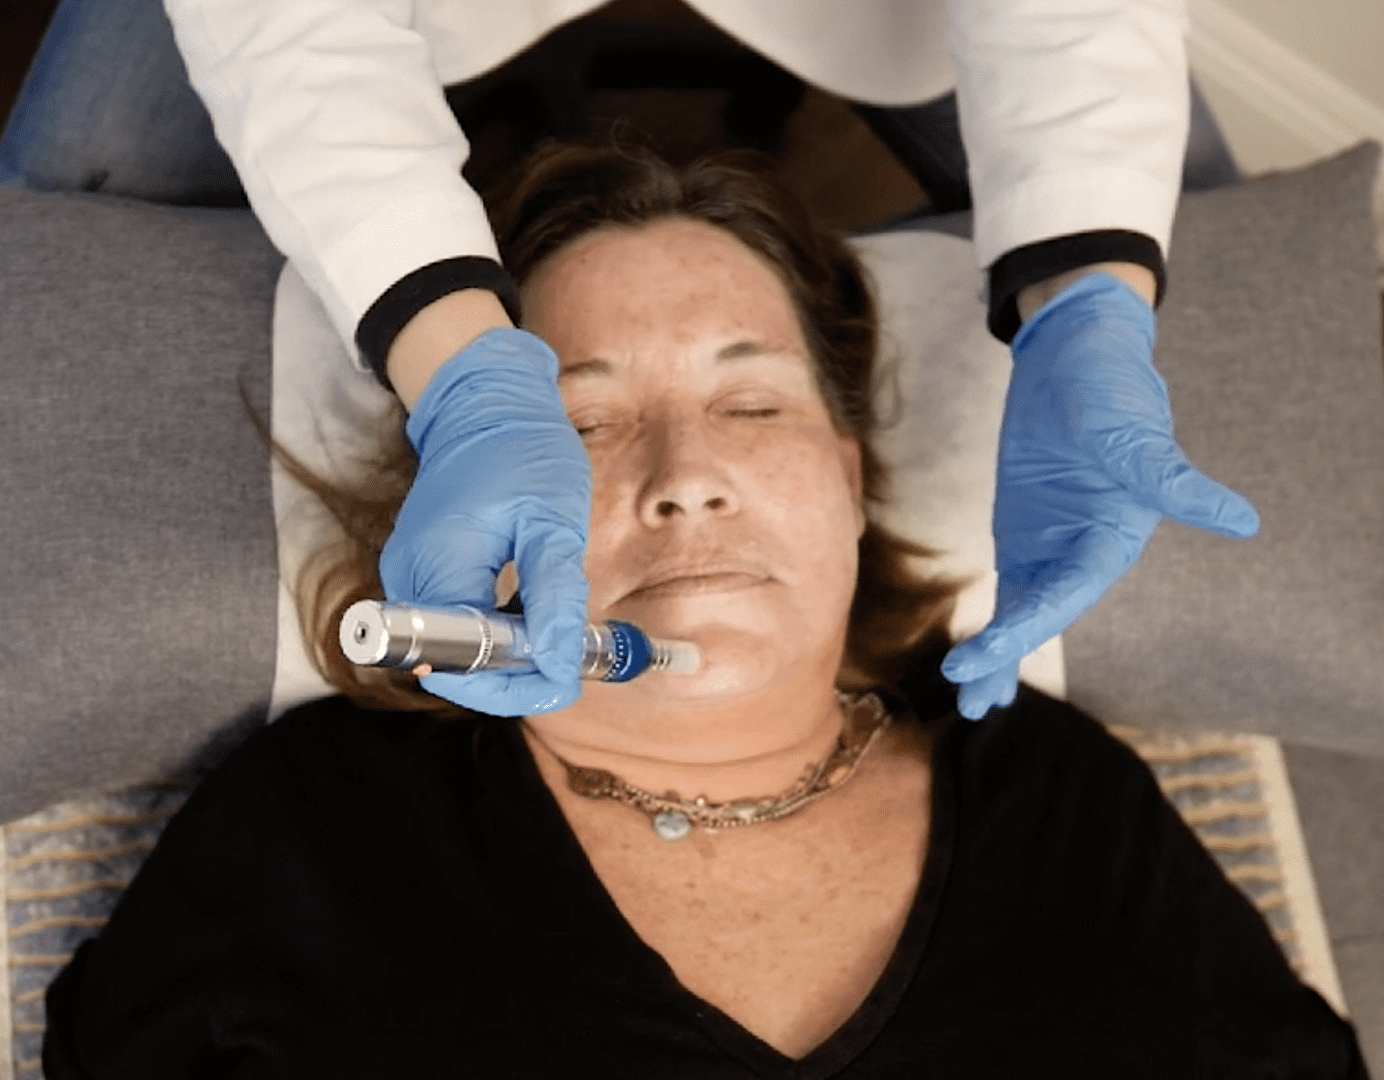 A woman getting her face waxed by an esthetician.